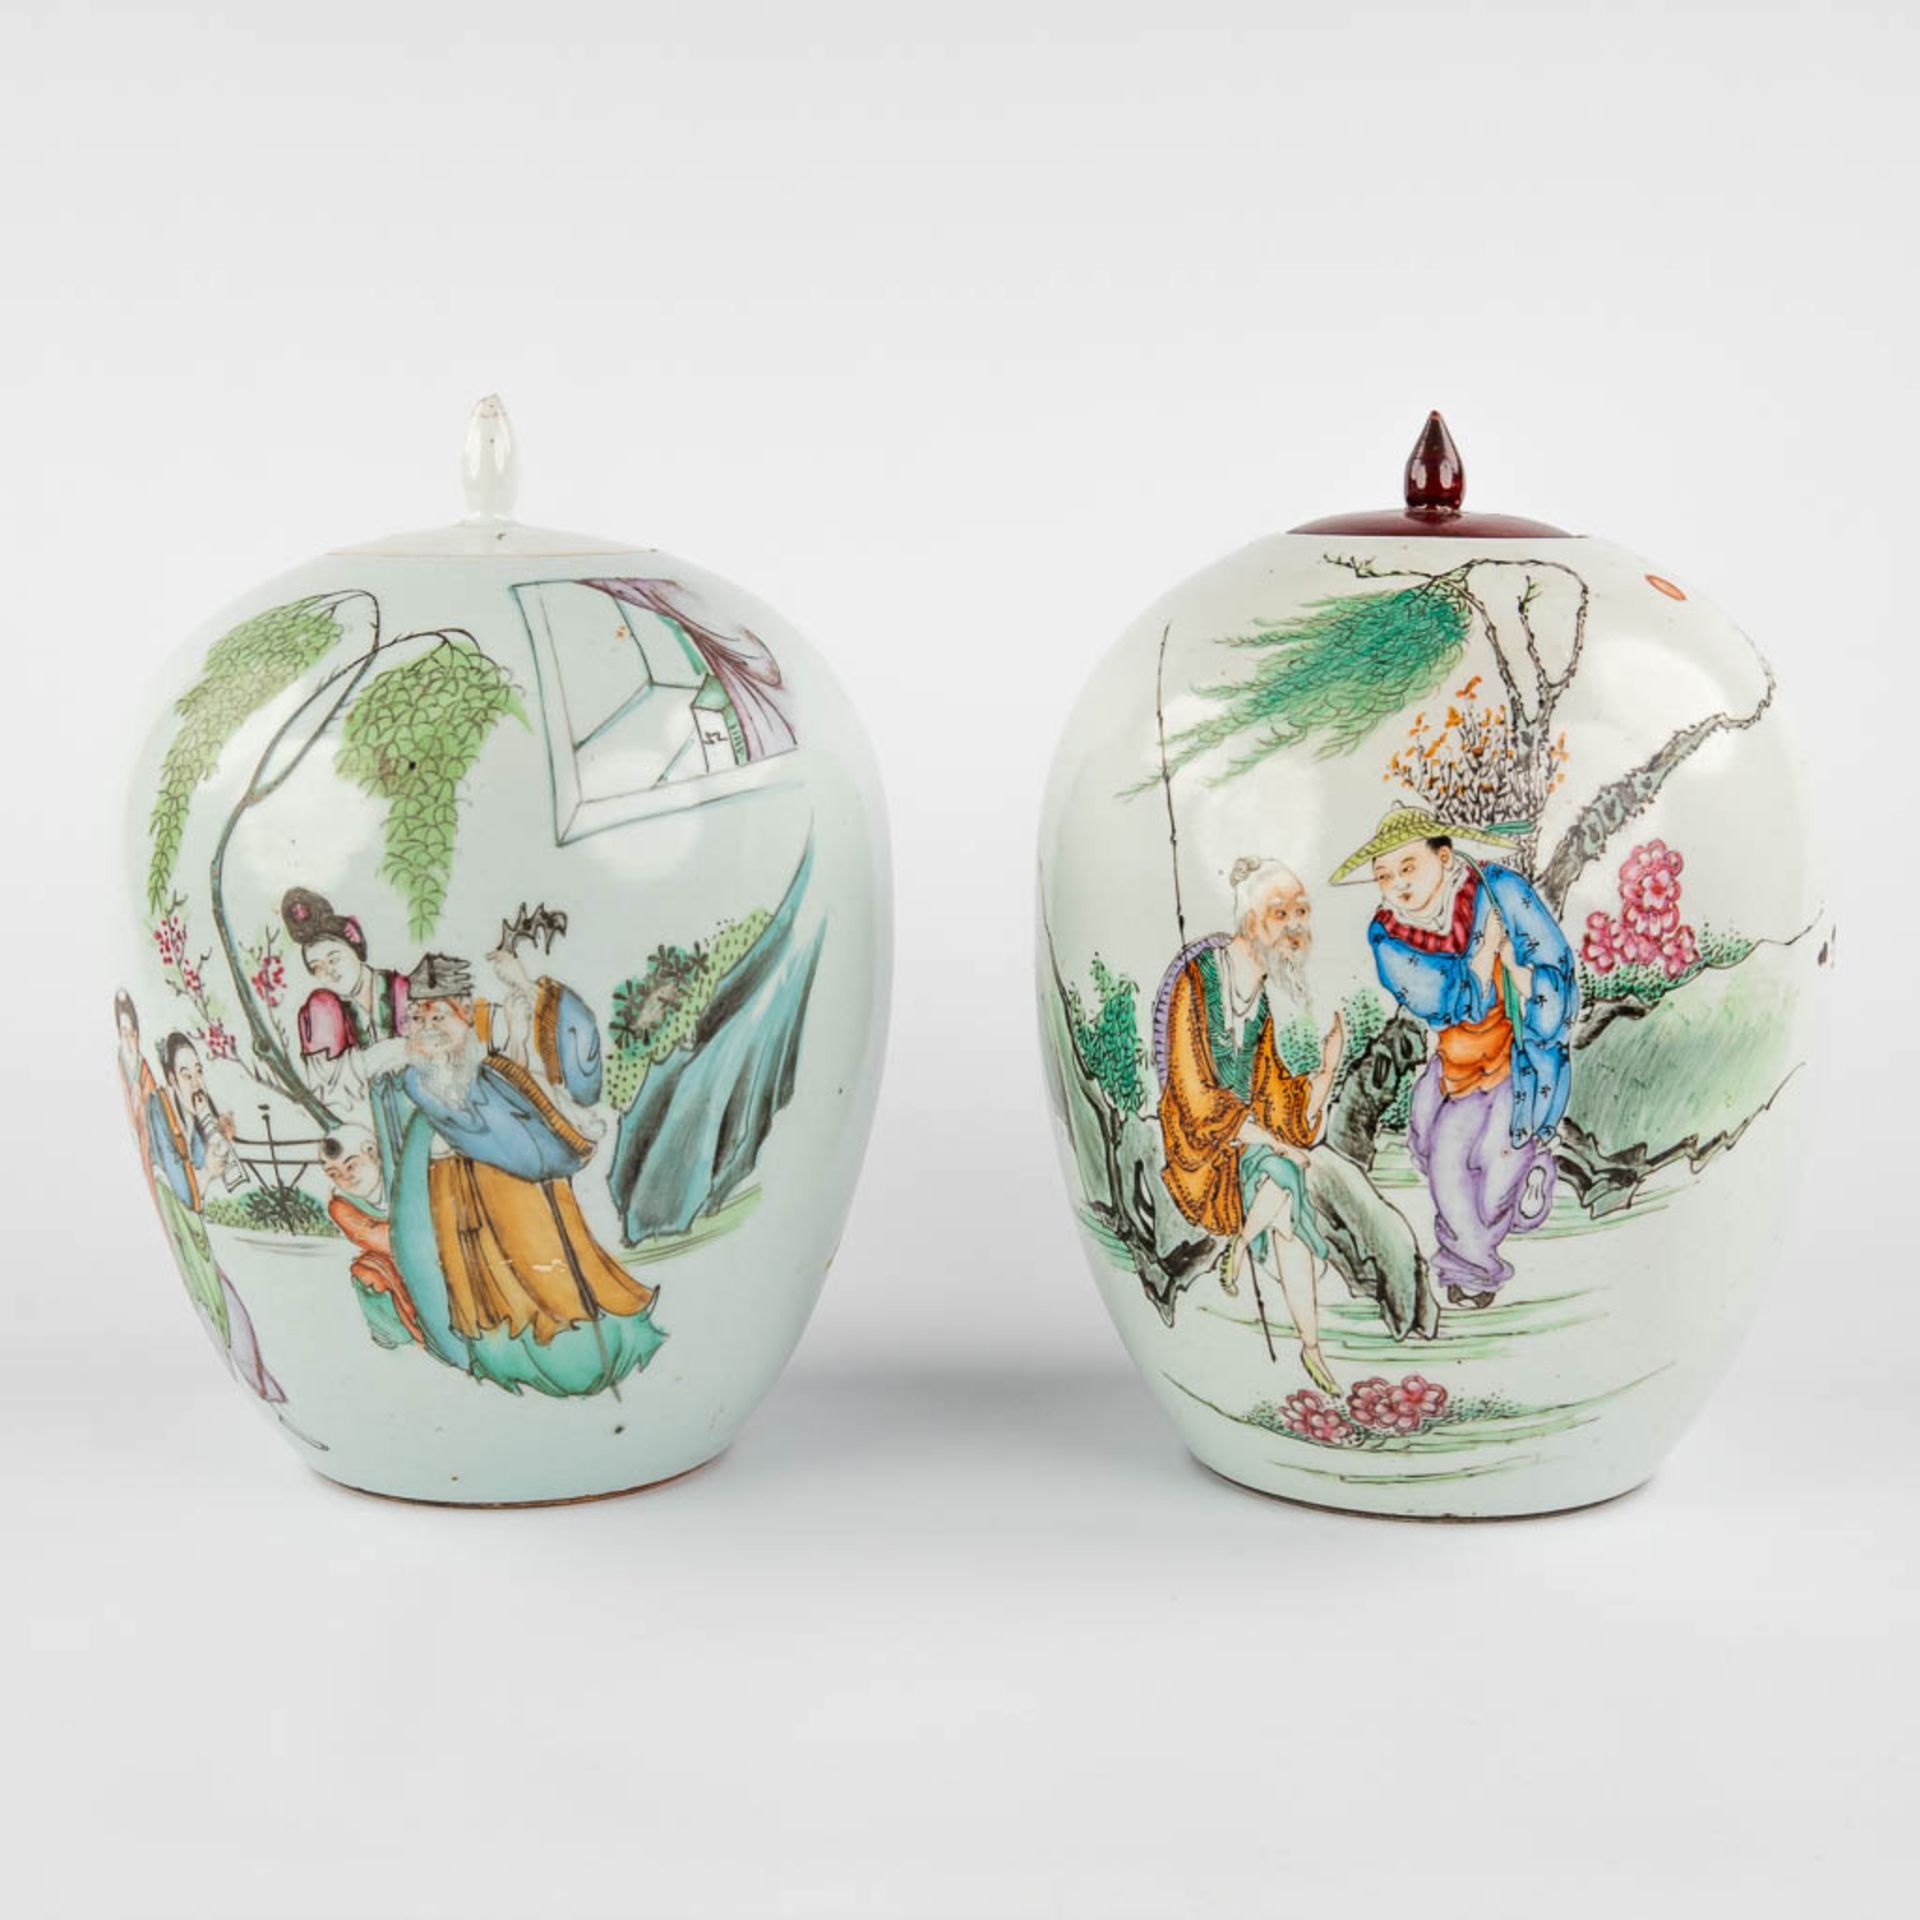 Two Chinese ginger jars, Famille Rose, decorated with wise men and fishermen. 19th/20th C. (H:30 x D